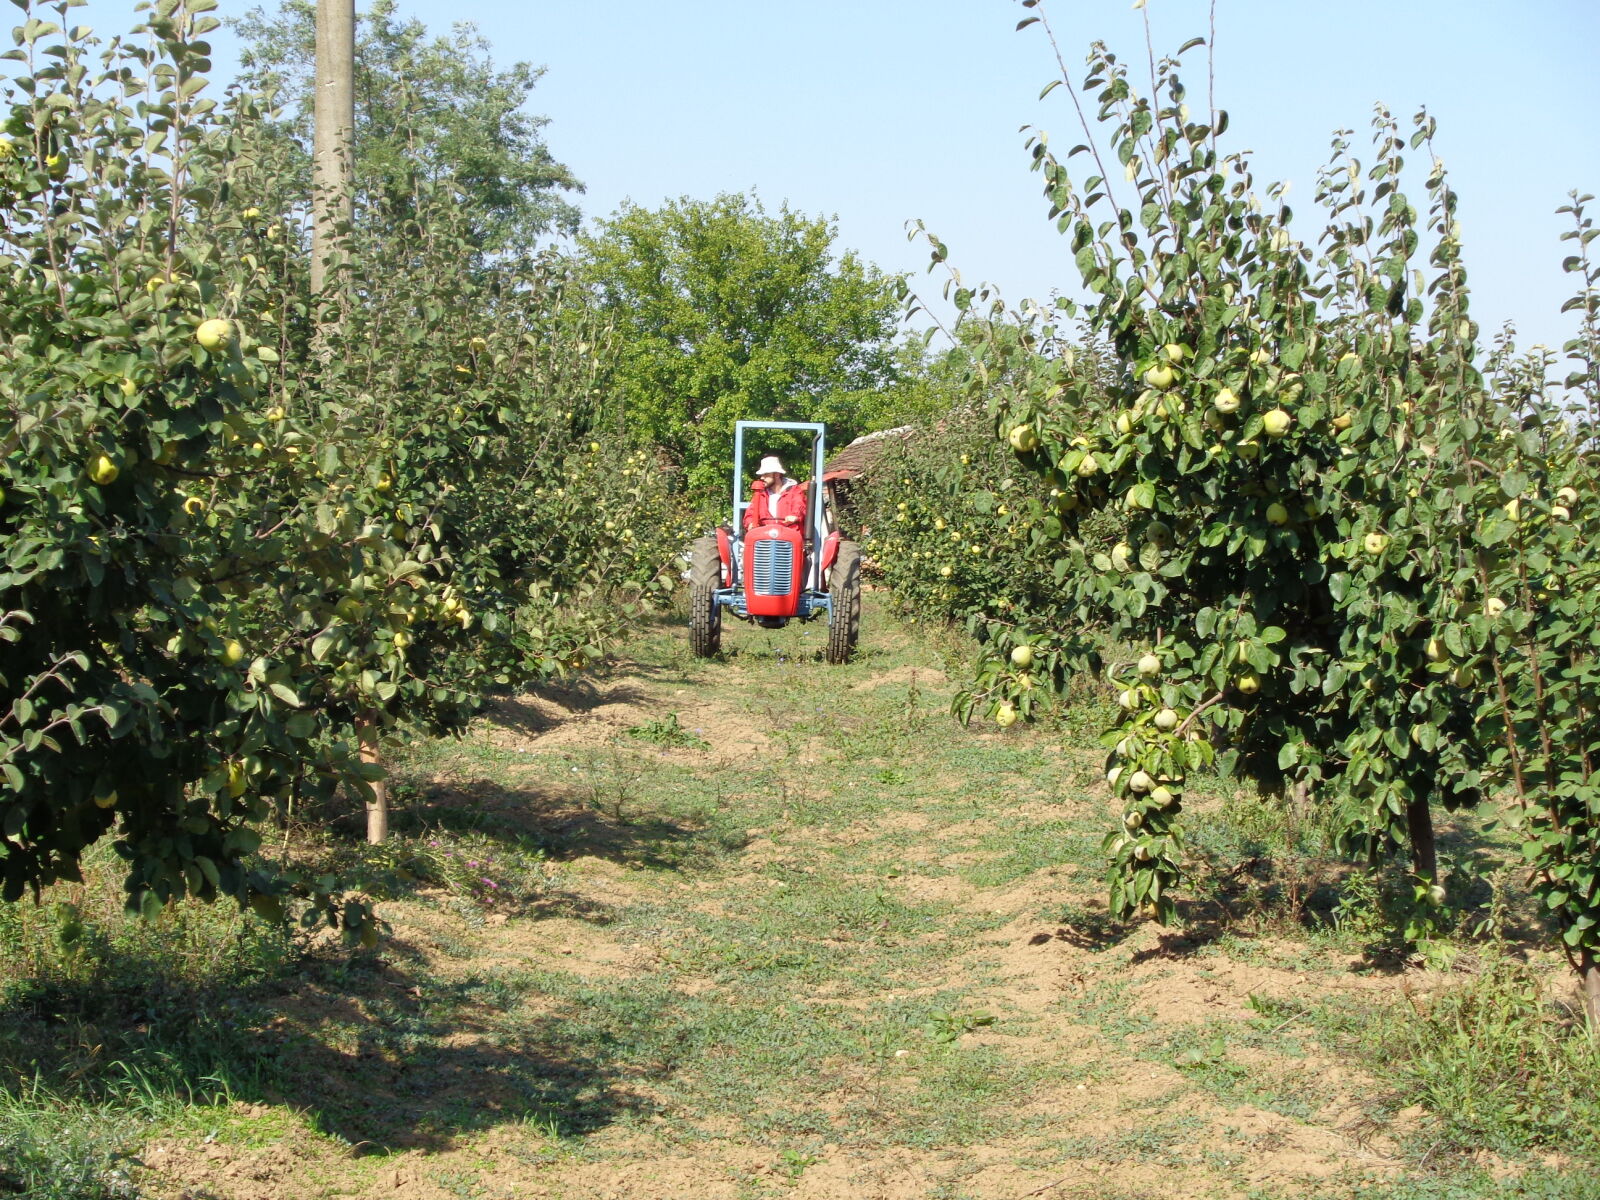 Sony Cyber-shot DSC-W830 sample photo. Agriculture, orchard, quince, tractor photography